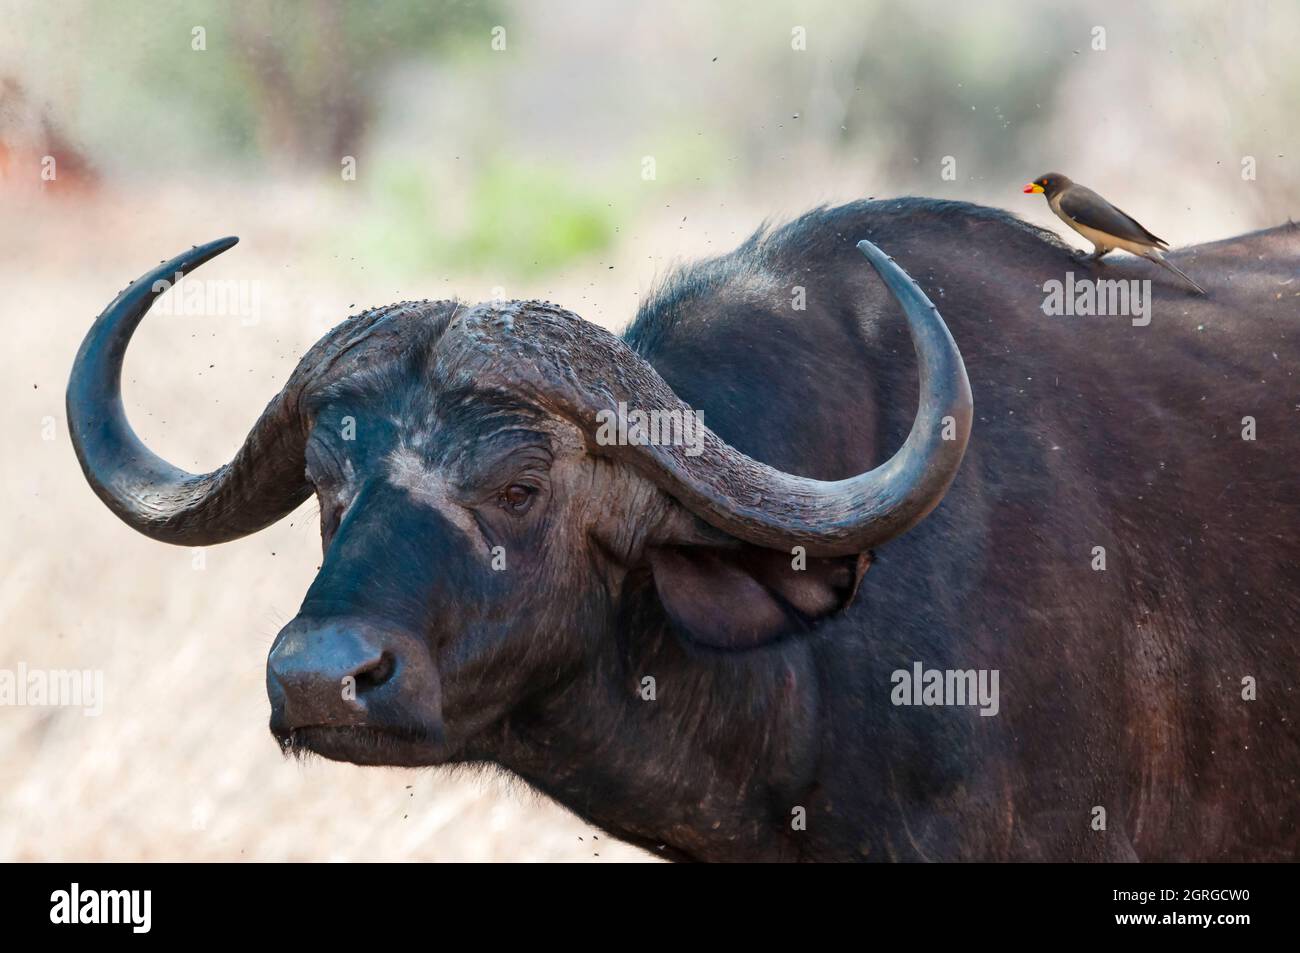 Kenya, Taita Hills Wildlife Sanctuary, African Buffalo (syncerus caffer) , Oxpecker (Buphagus erythrorhynchus) sur son corps Banque D'Images